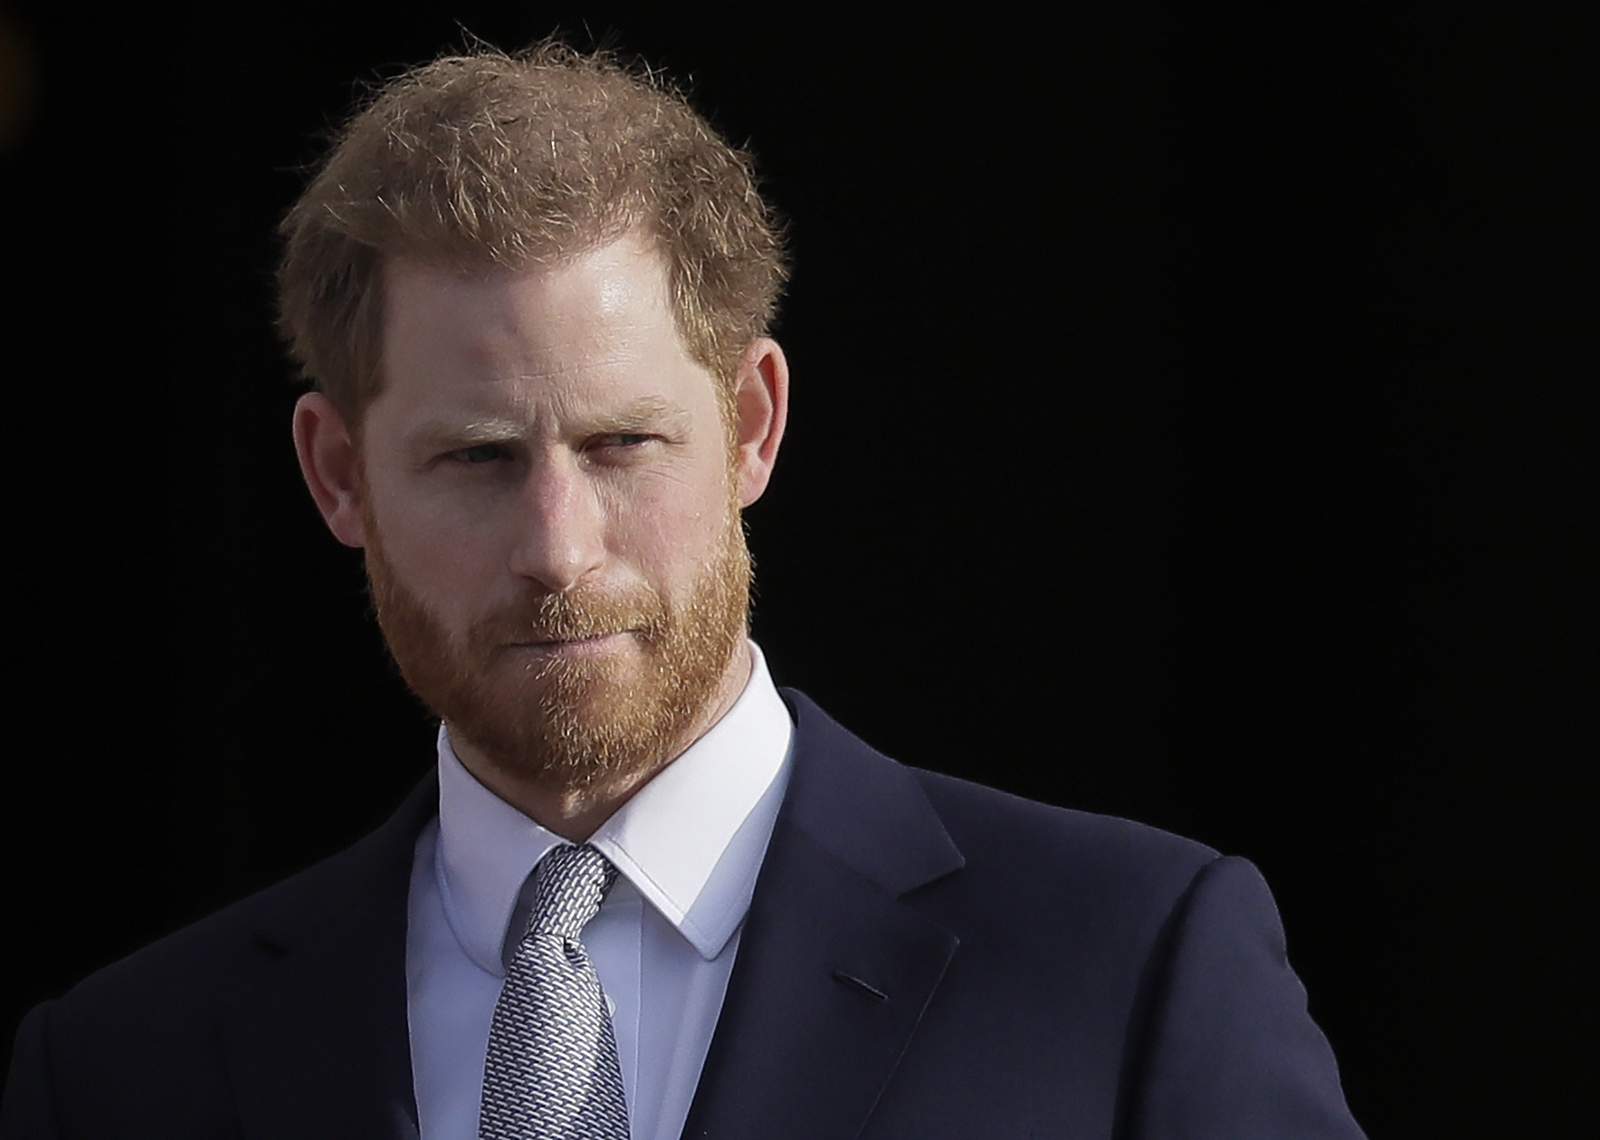 Prince Harry accepts apology, damages in UK libel suit